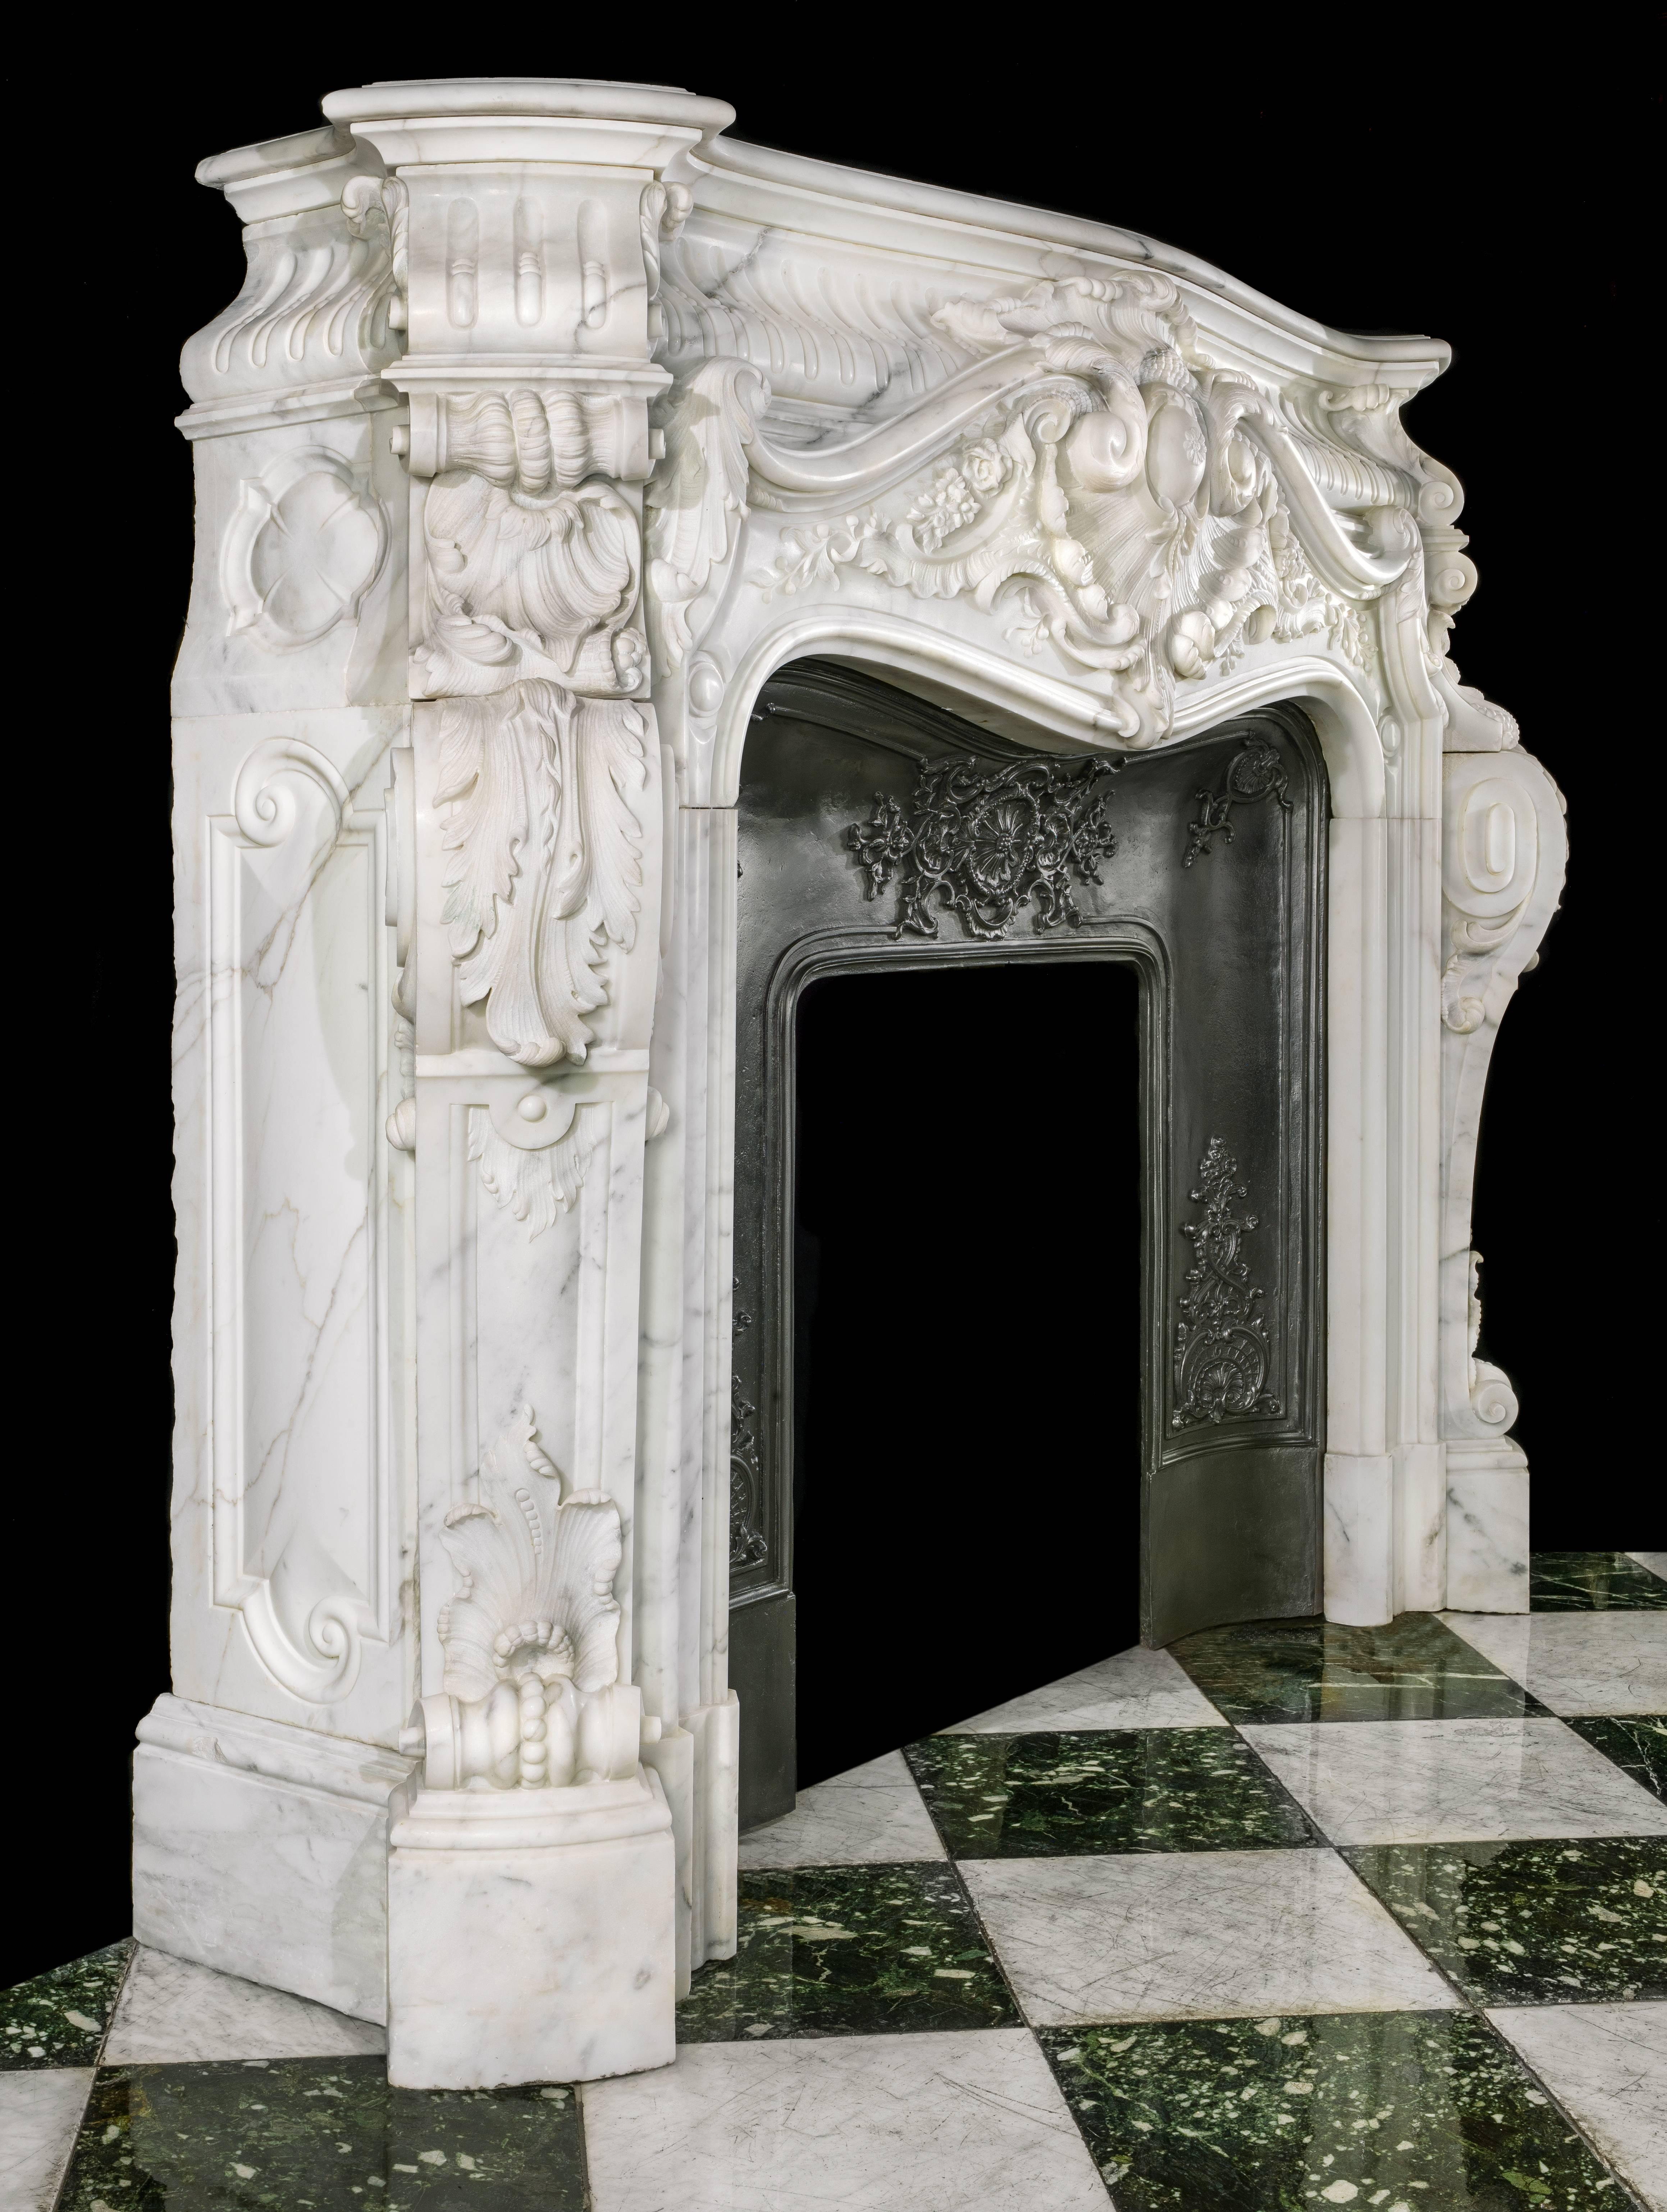 A rare, monumental and highly ornate Louis XV style deeply carved statuary marble antique fireplace surround with it's original cast iron insert. The upper stop fluted coffered frieze sits above and behind an enormous and most elaborately scrolled